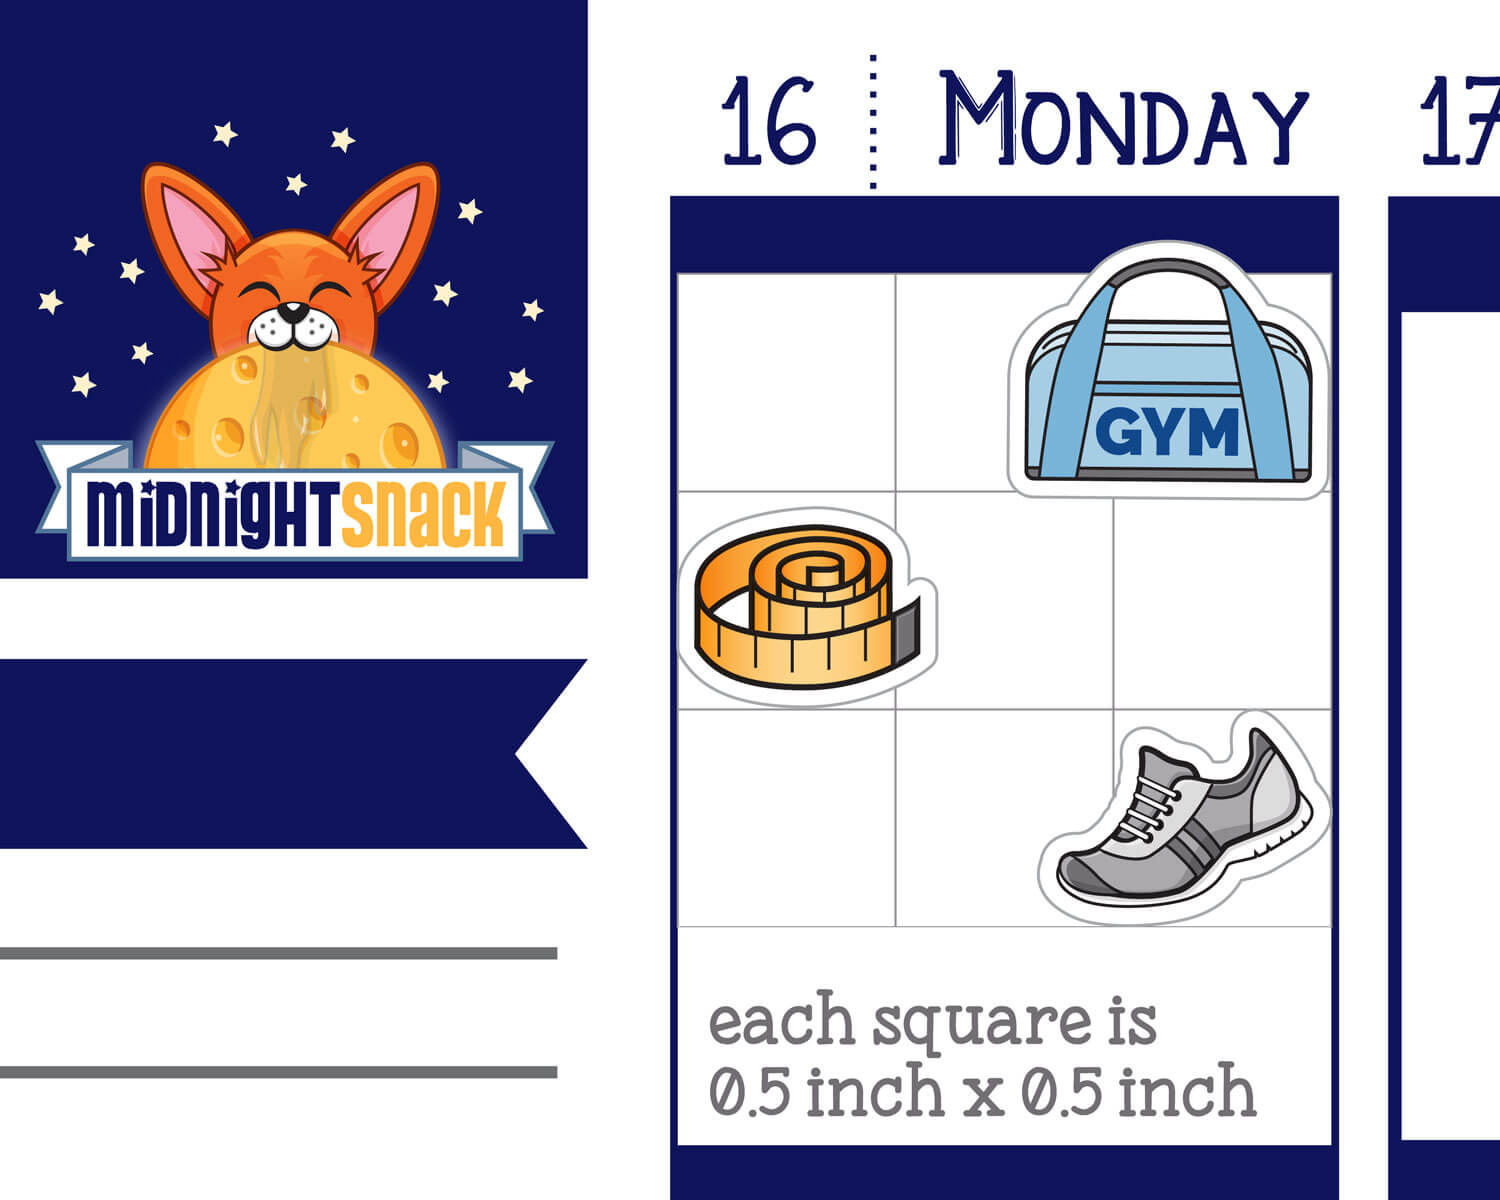 Exercise and Weight Loss Sampler Planner Stickers from Midnight Snack Planner